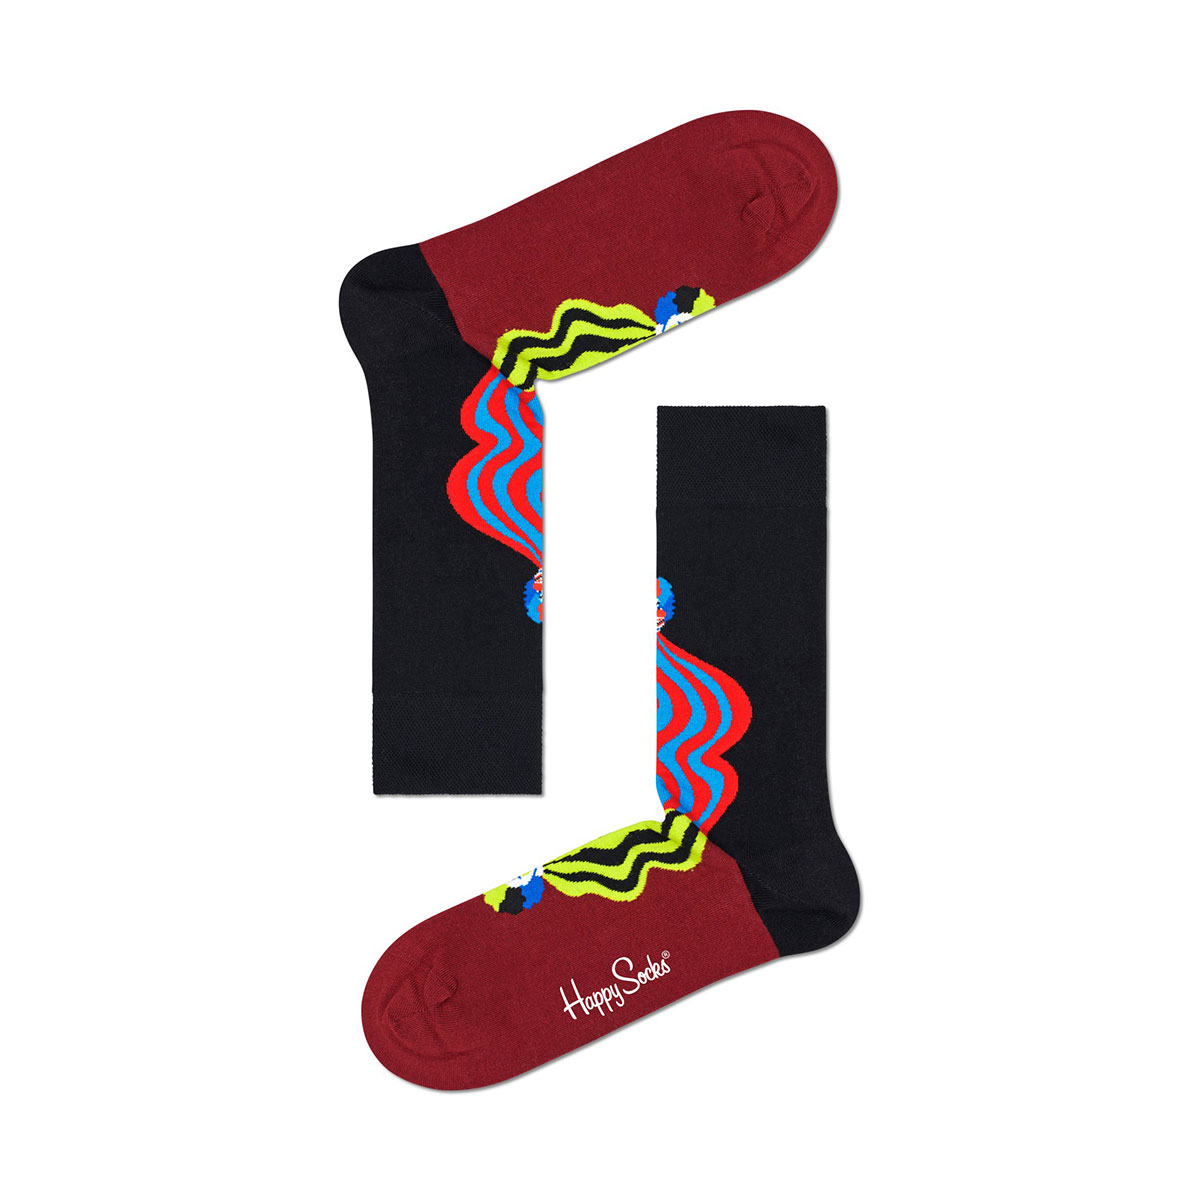 Double Clown Sock <img src="/banner_images/banner_0000000180.gif">